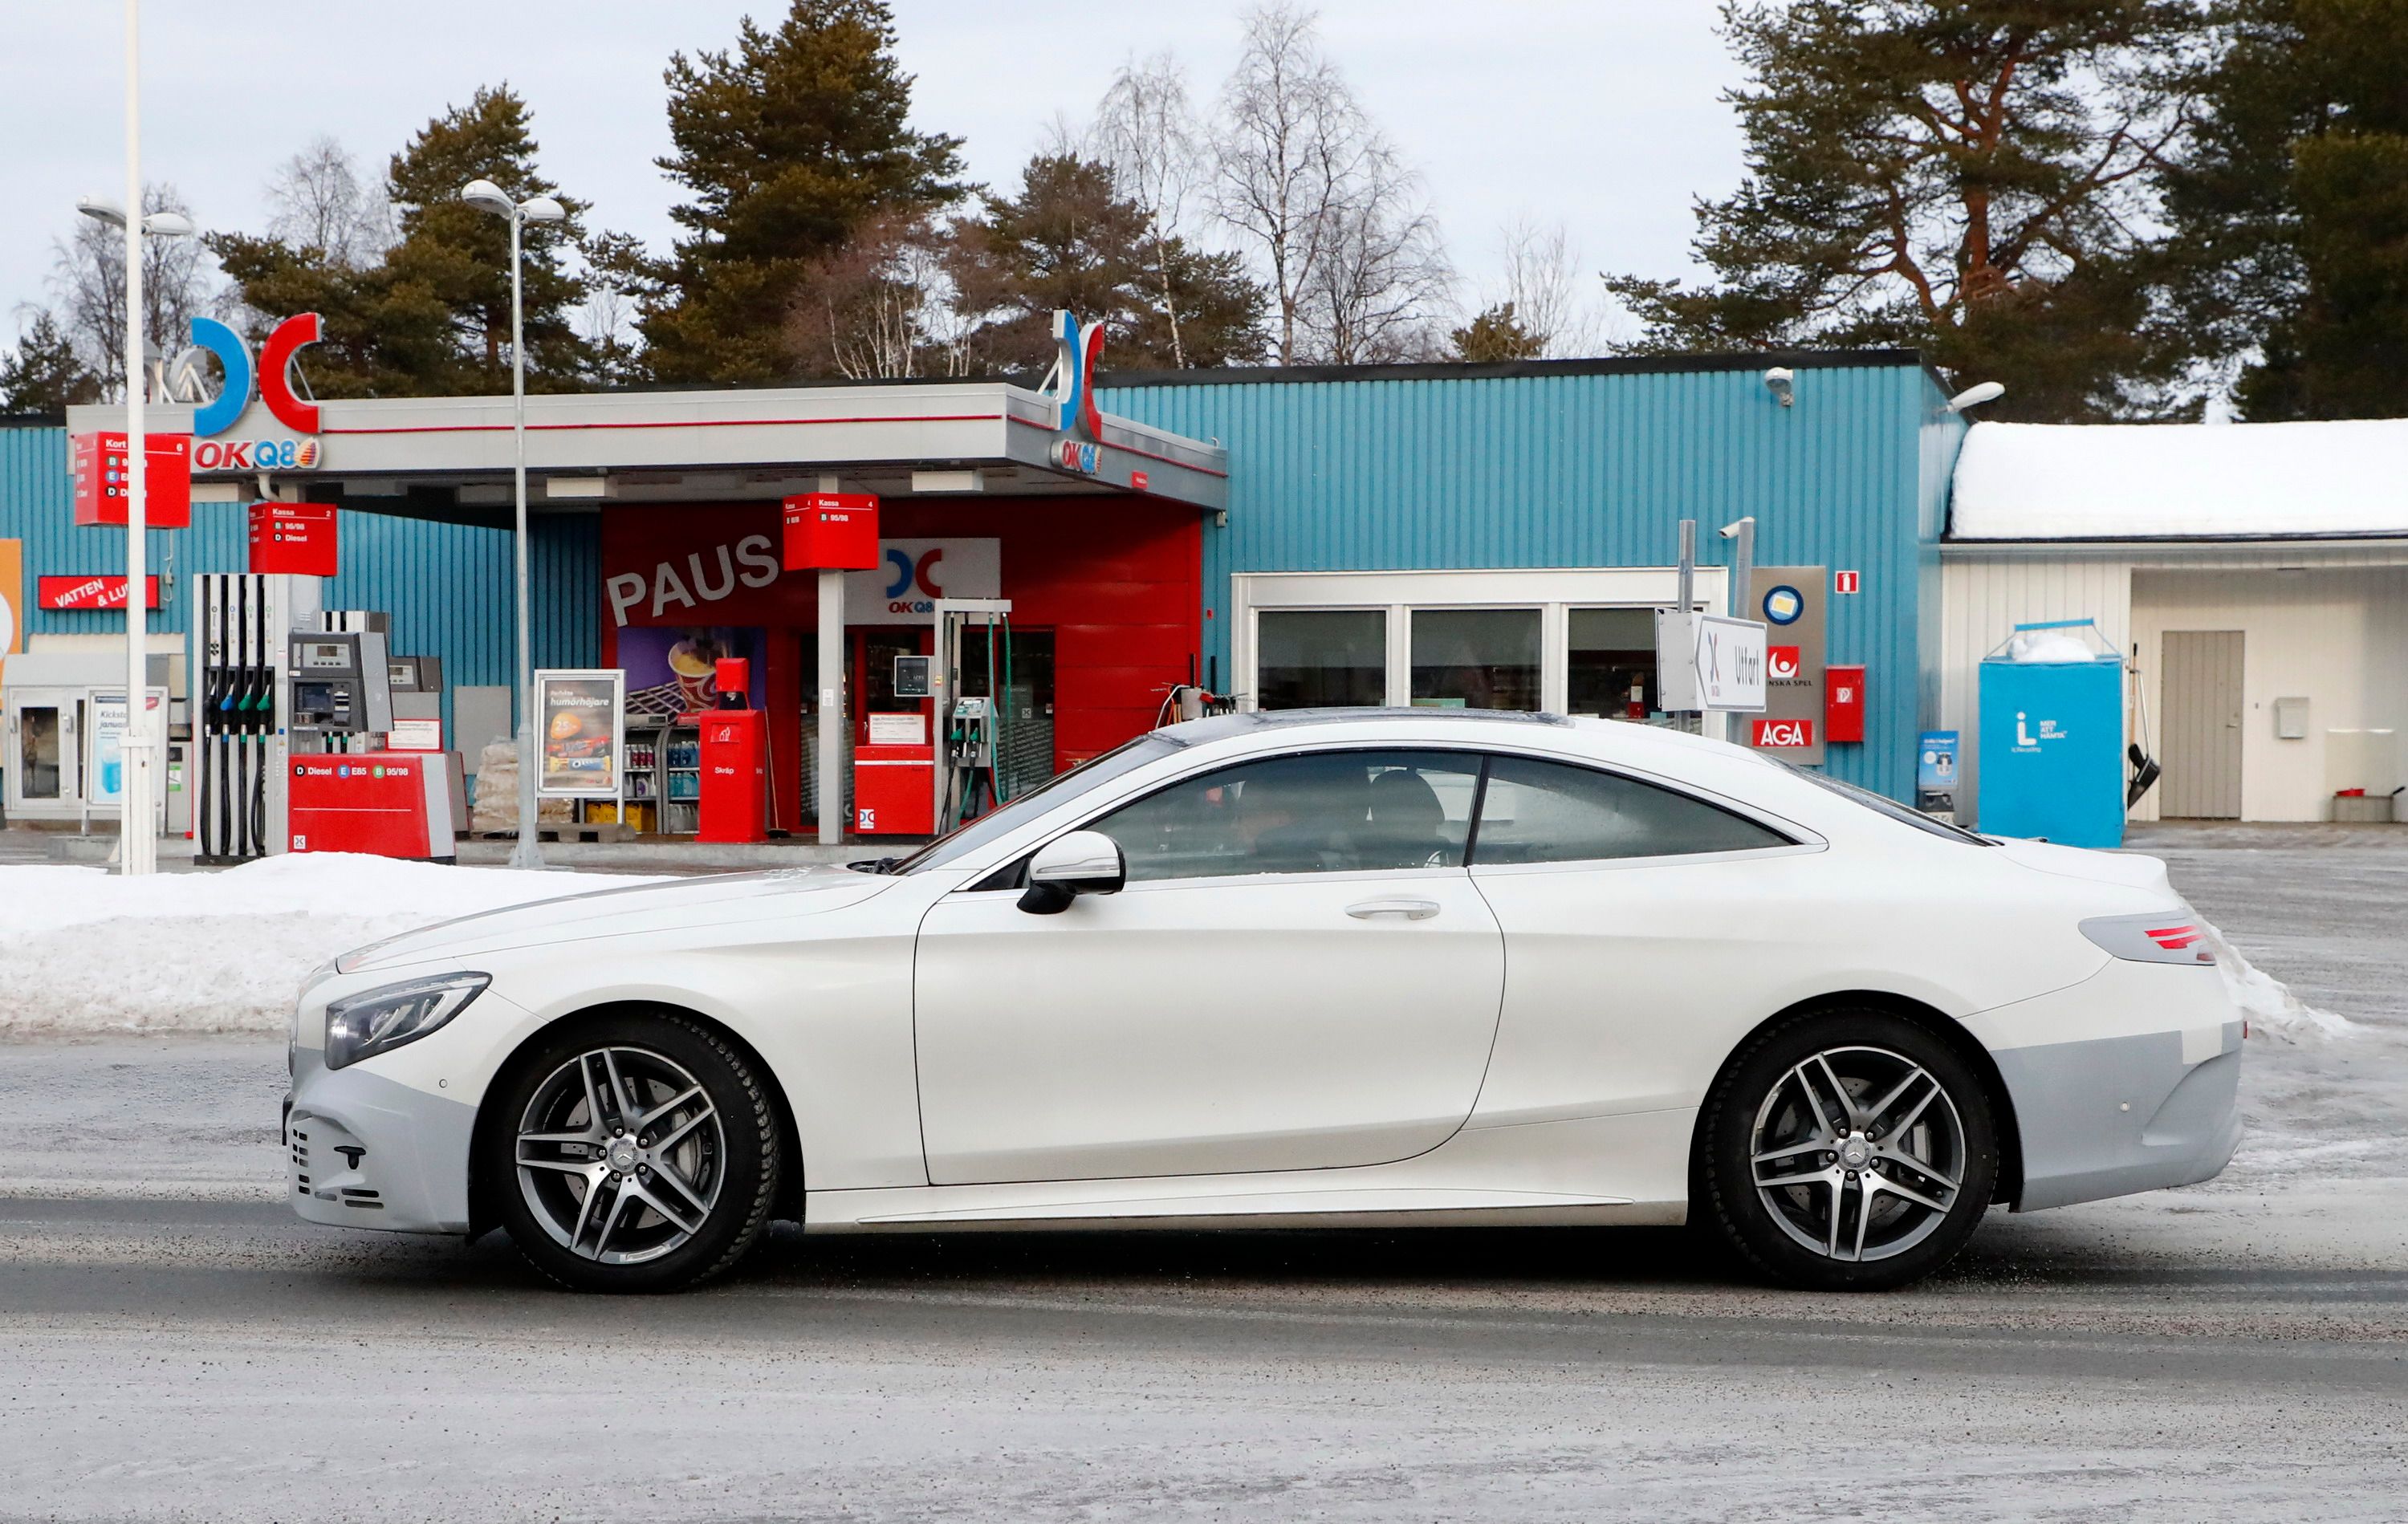 2018 Mercedes-Benz S-Class Coupe